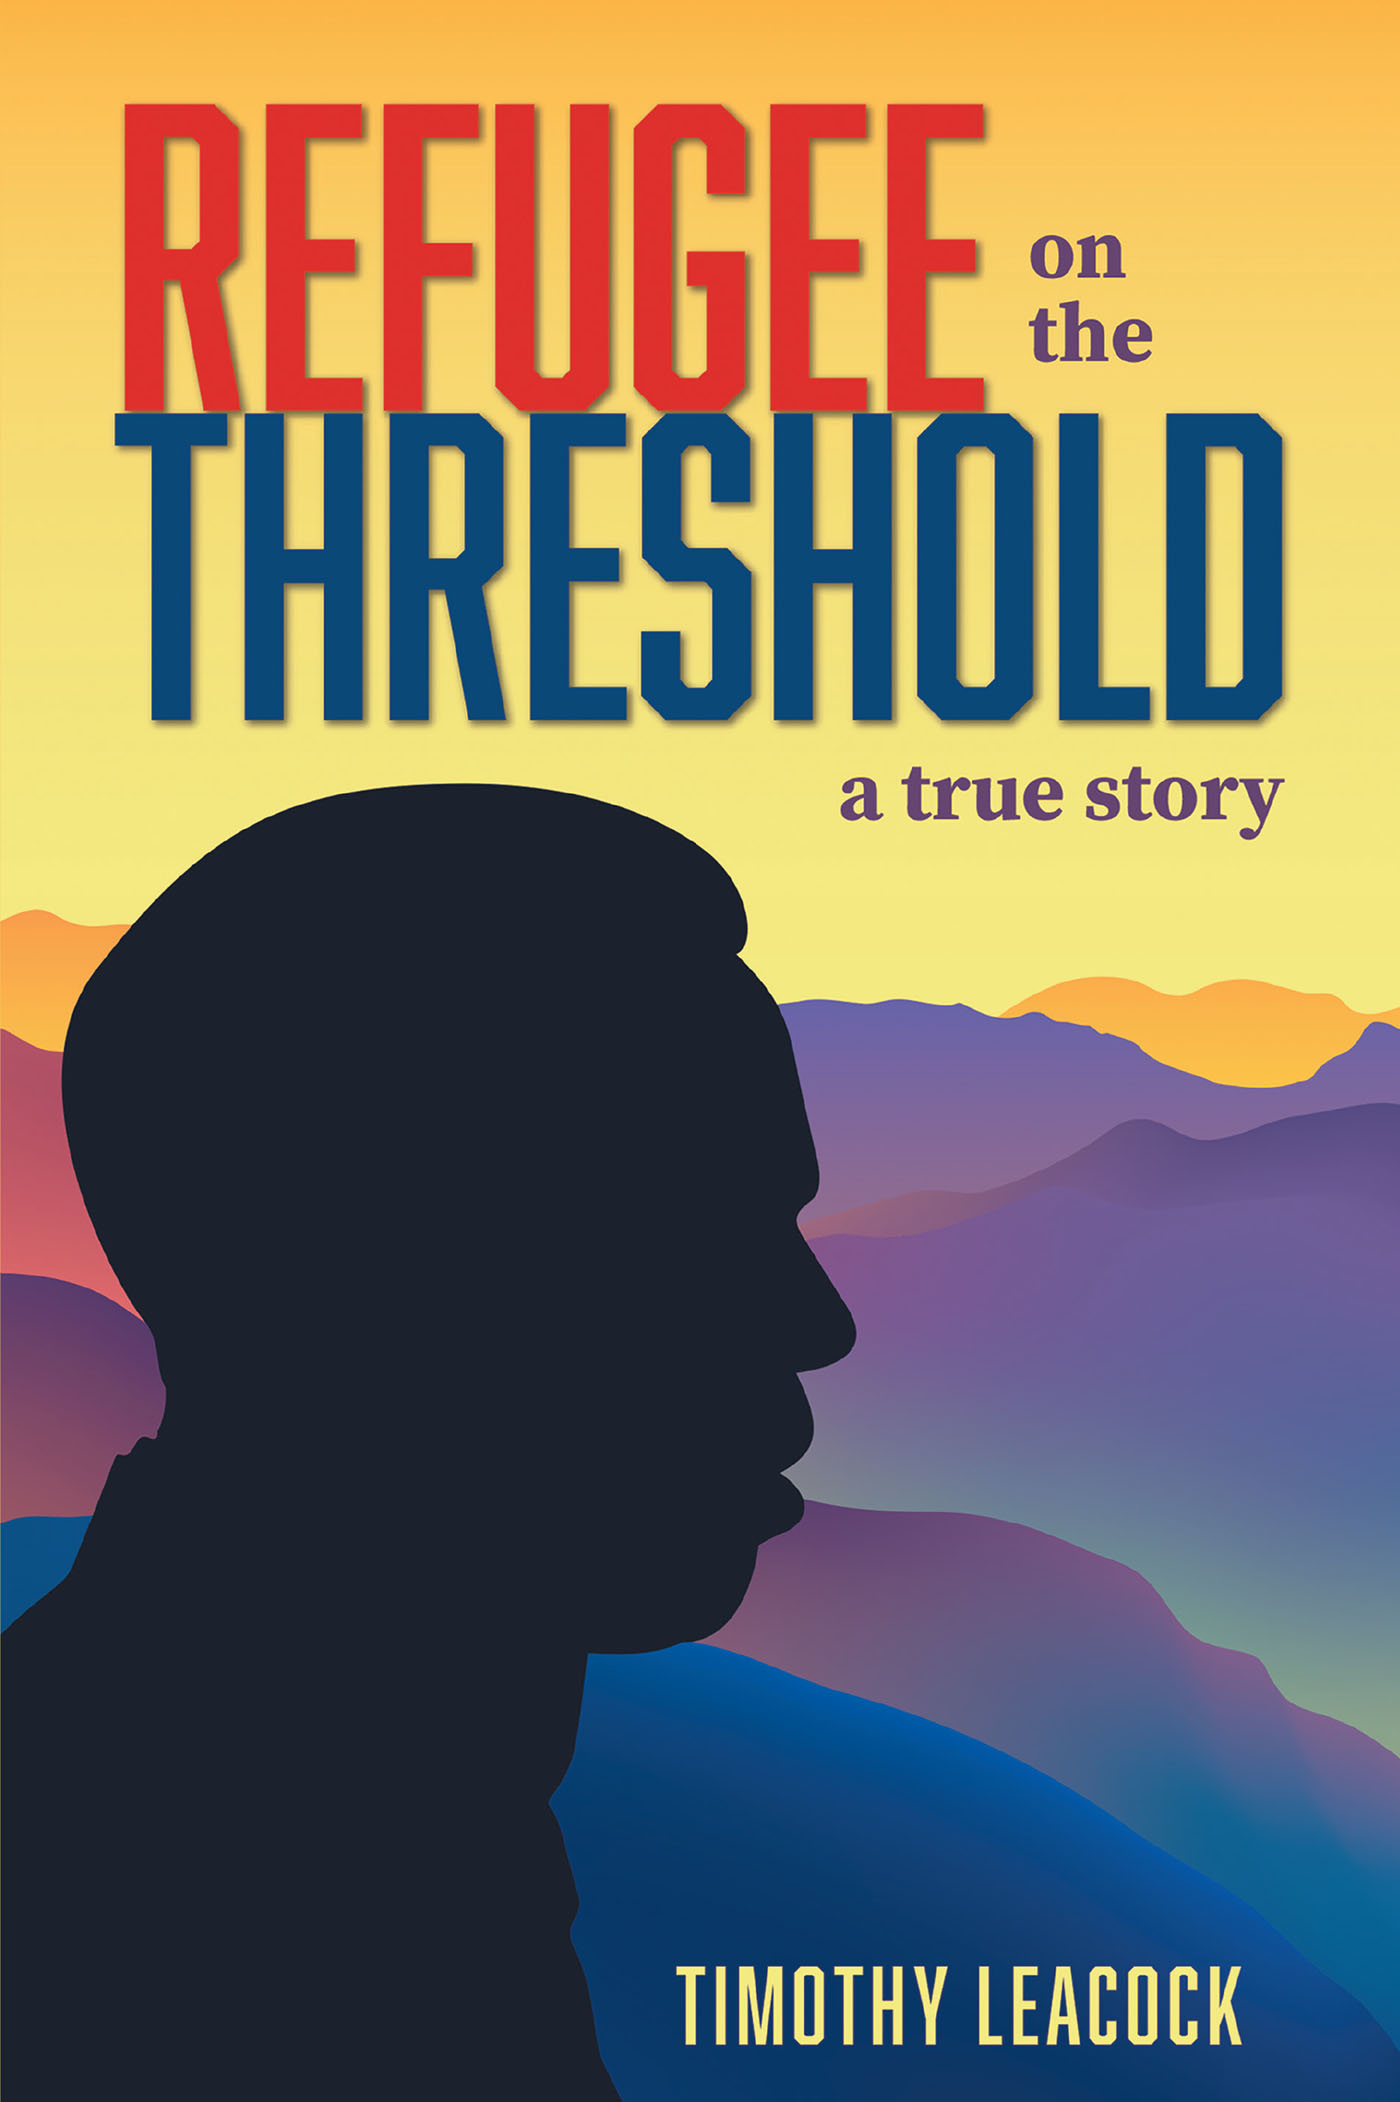 Author Timothy Leacock’s New Book, “Refugee on the Threshold: A True Story,” Follows a Somali Refugee’s Desperate Pleas to Escape Certain Death and Seek Asylum